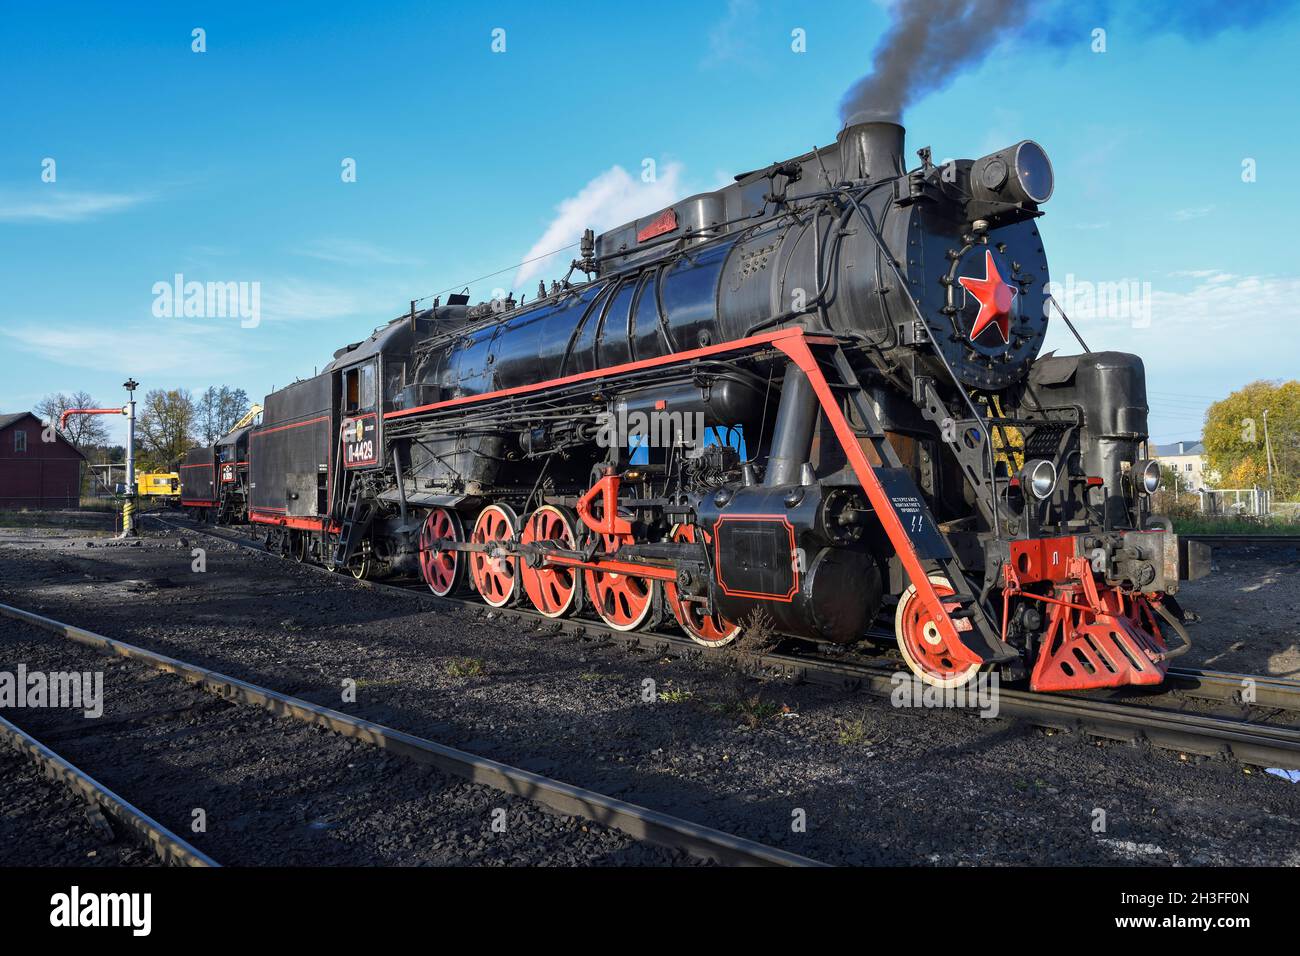 SORTAVALA, RUSSIA - OCTOBER 07, 2021: Soviet mainline freight steam locomotive of the 'L' series (L-4429, Lebedyanka) on access roads on a sunny Octob Stock Photo